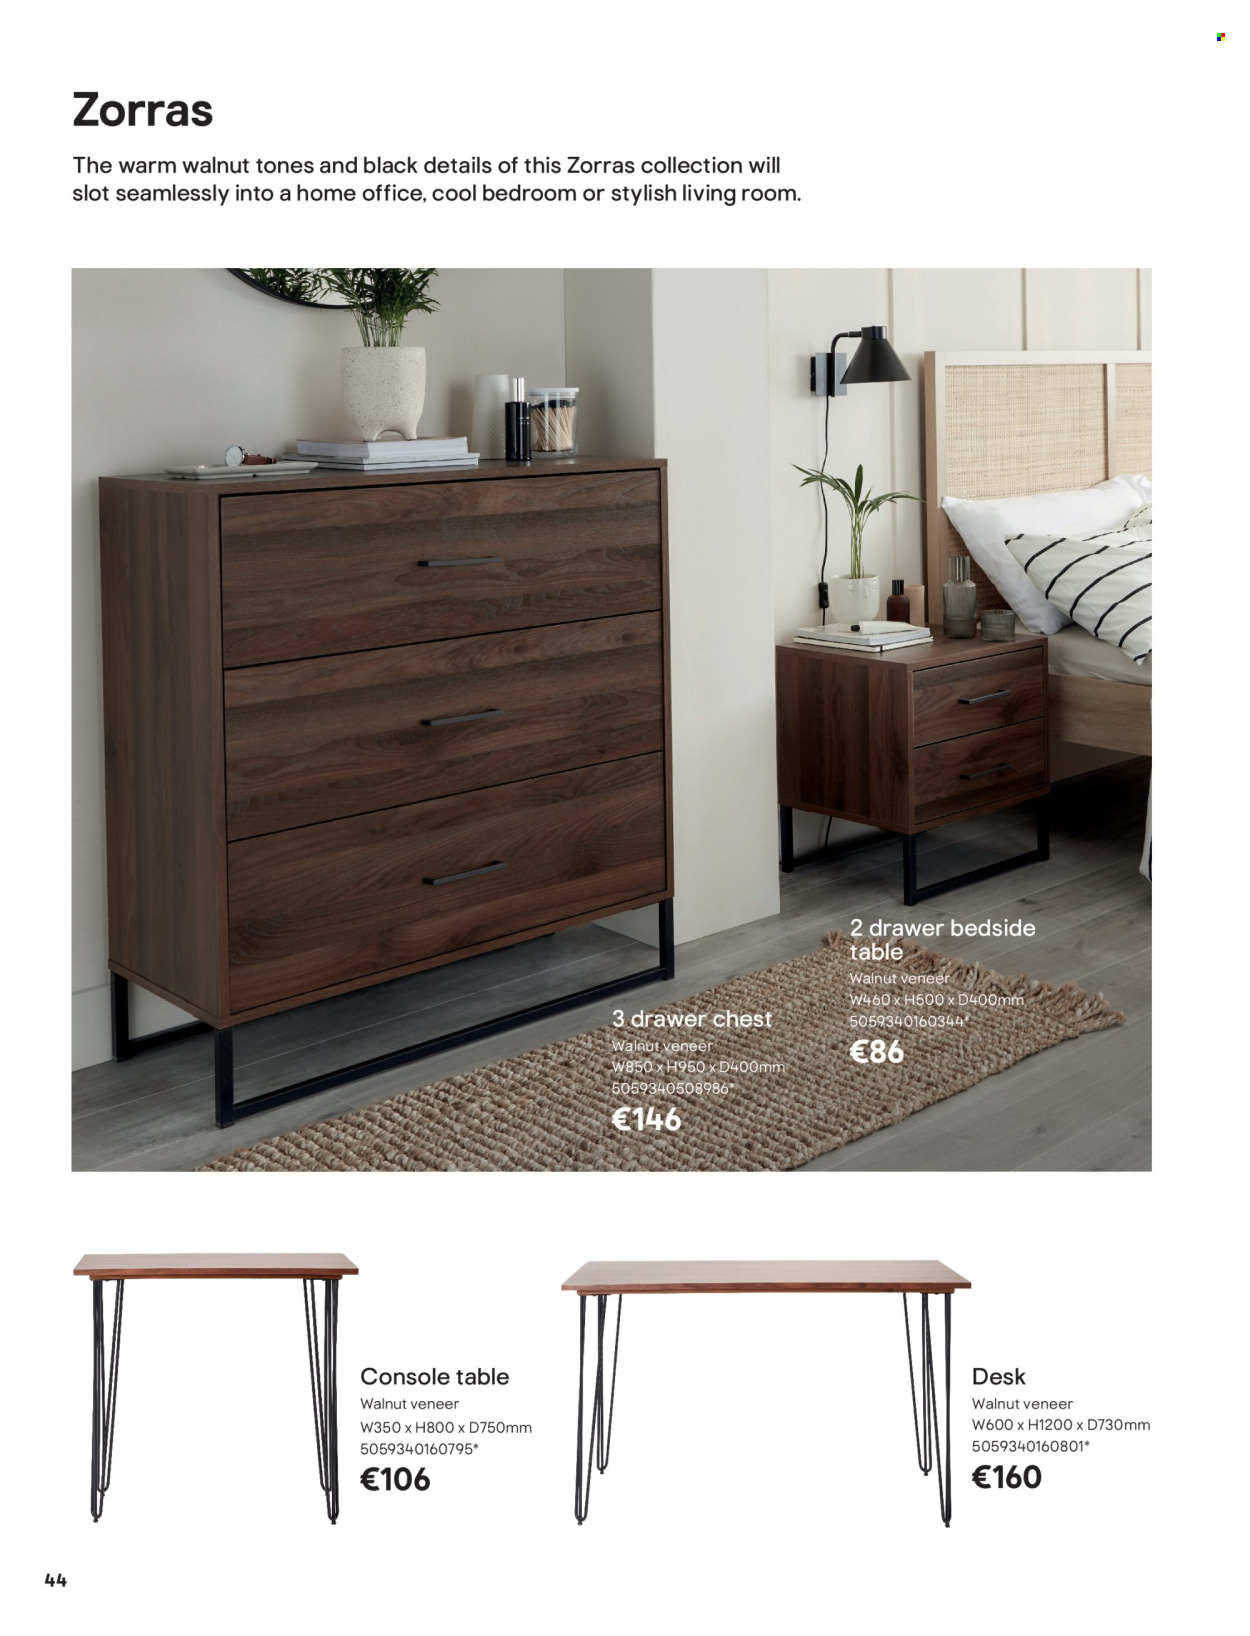 B&Q offer  - Sales products - table, bedside table, desk. Page 44.